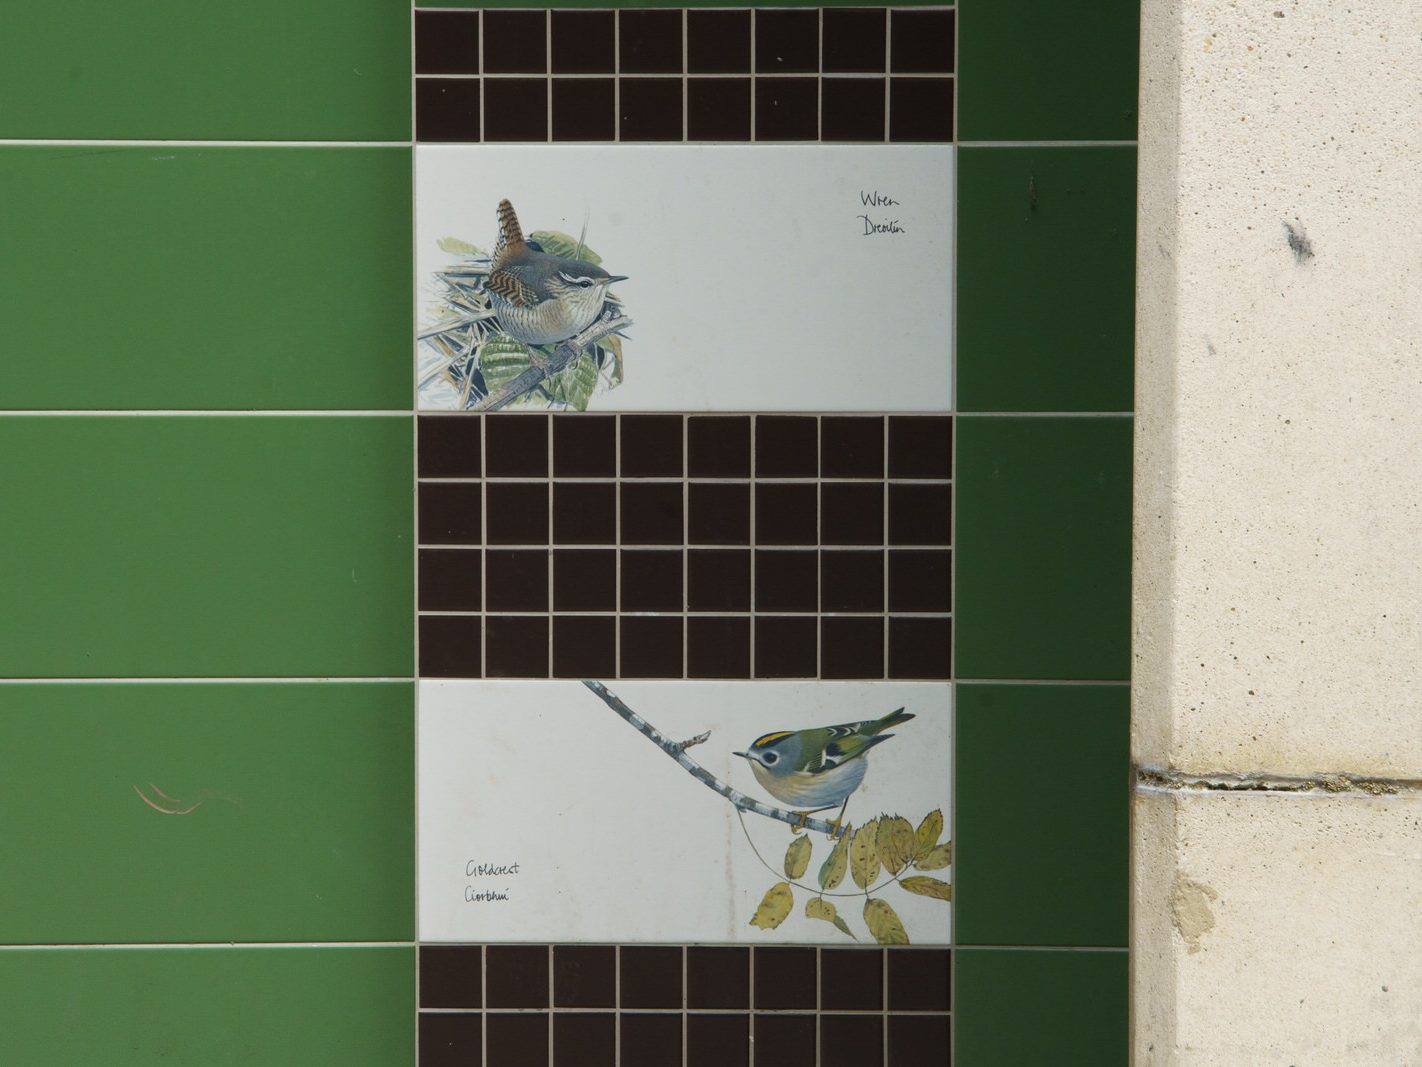 TILES BY KILLIAN MULLARNEY FEATURING BIRDS NATIVE TO IRELAND [MICRO PUBLIC SPACE ON WOLFE TONE STREET]-236751-1